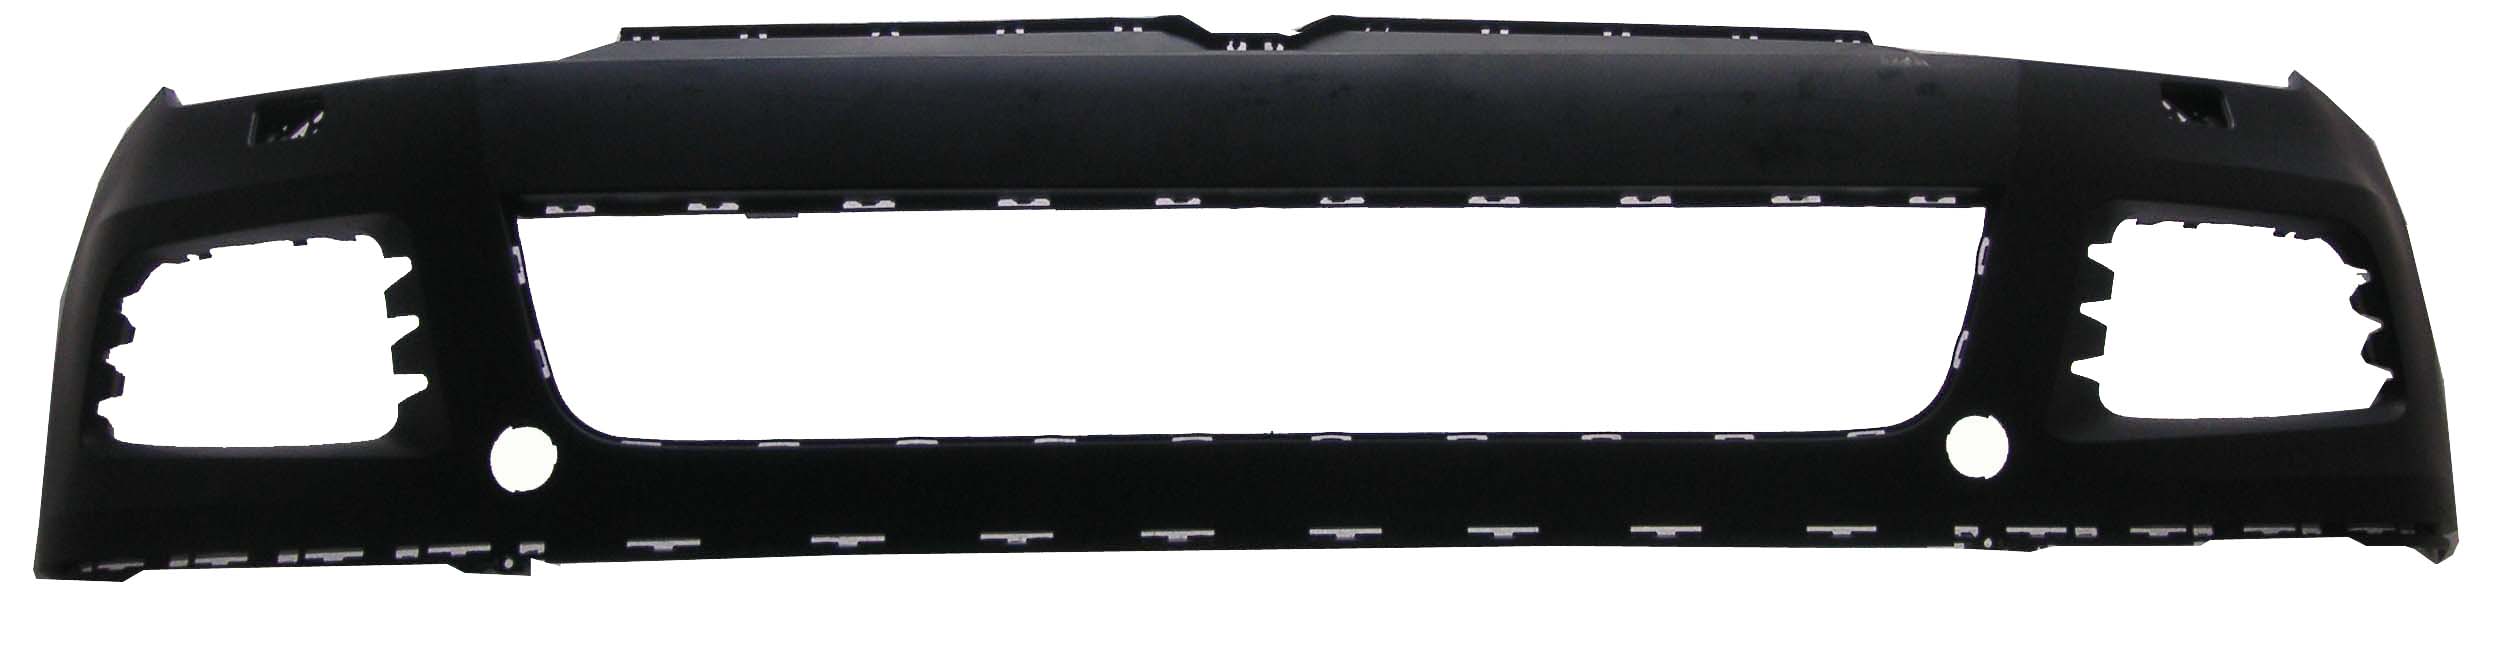 Aftermarket BUMPER COVERS for VOLKSWAGEN - TOUAREG, TOUAREG,11-14,Front bumper cover